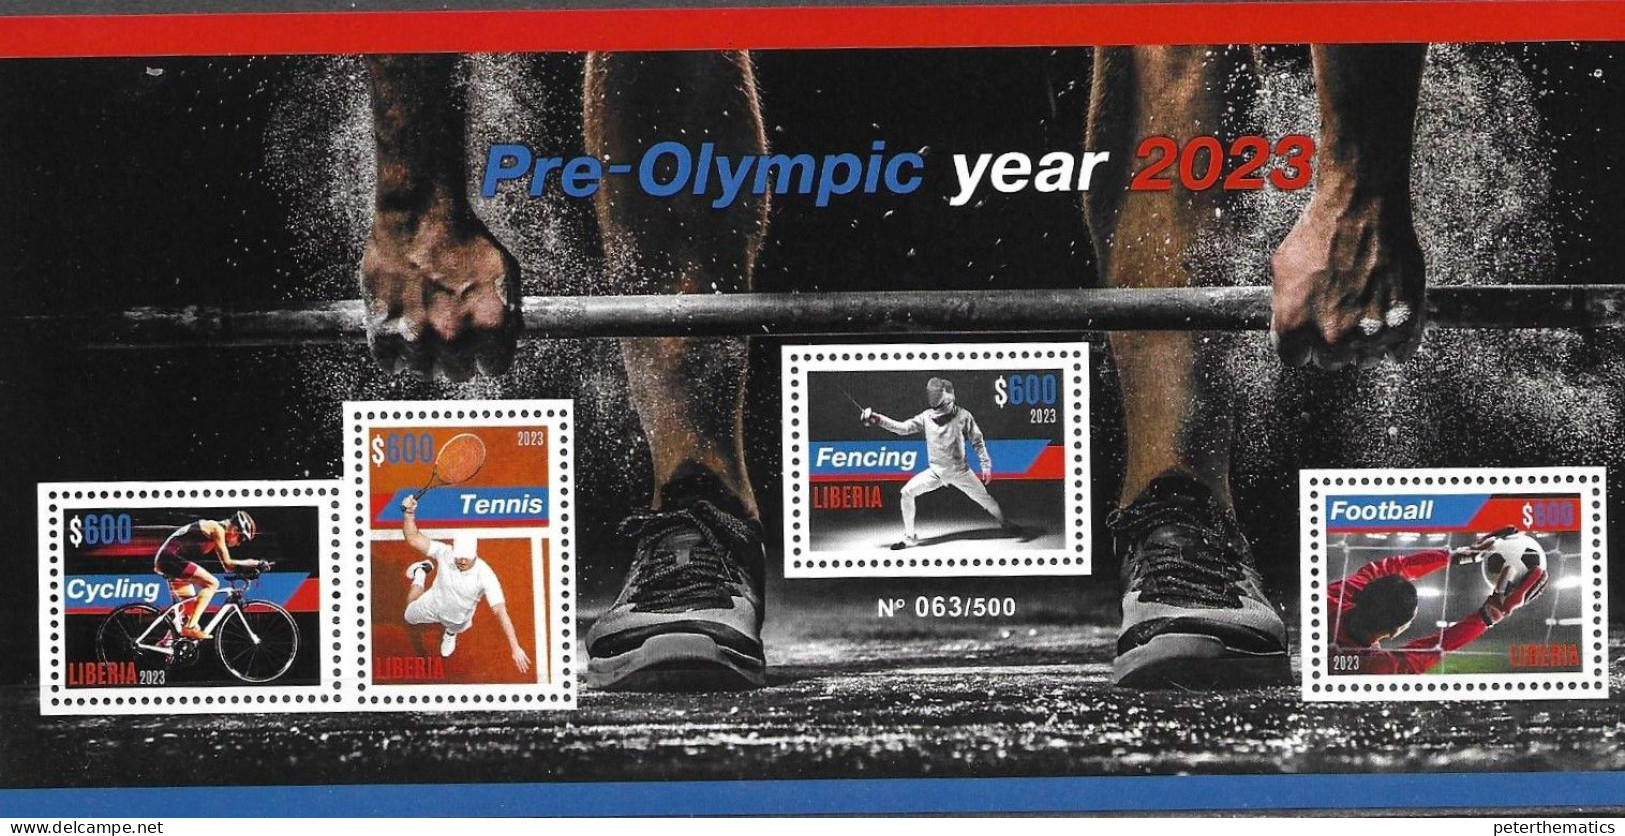 LIBERIA, 2023, MNH, PREOLYMPIC ISSUE, PARIS OLYMPICS, FOOTBALL, CYCLING, TENNIS, FENCING, LIMITED NUMBERED SLT, OFFICIAL - Sommer 2024: Paris